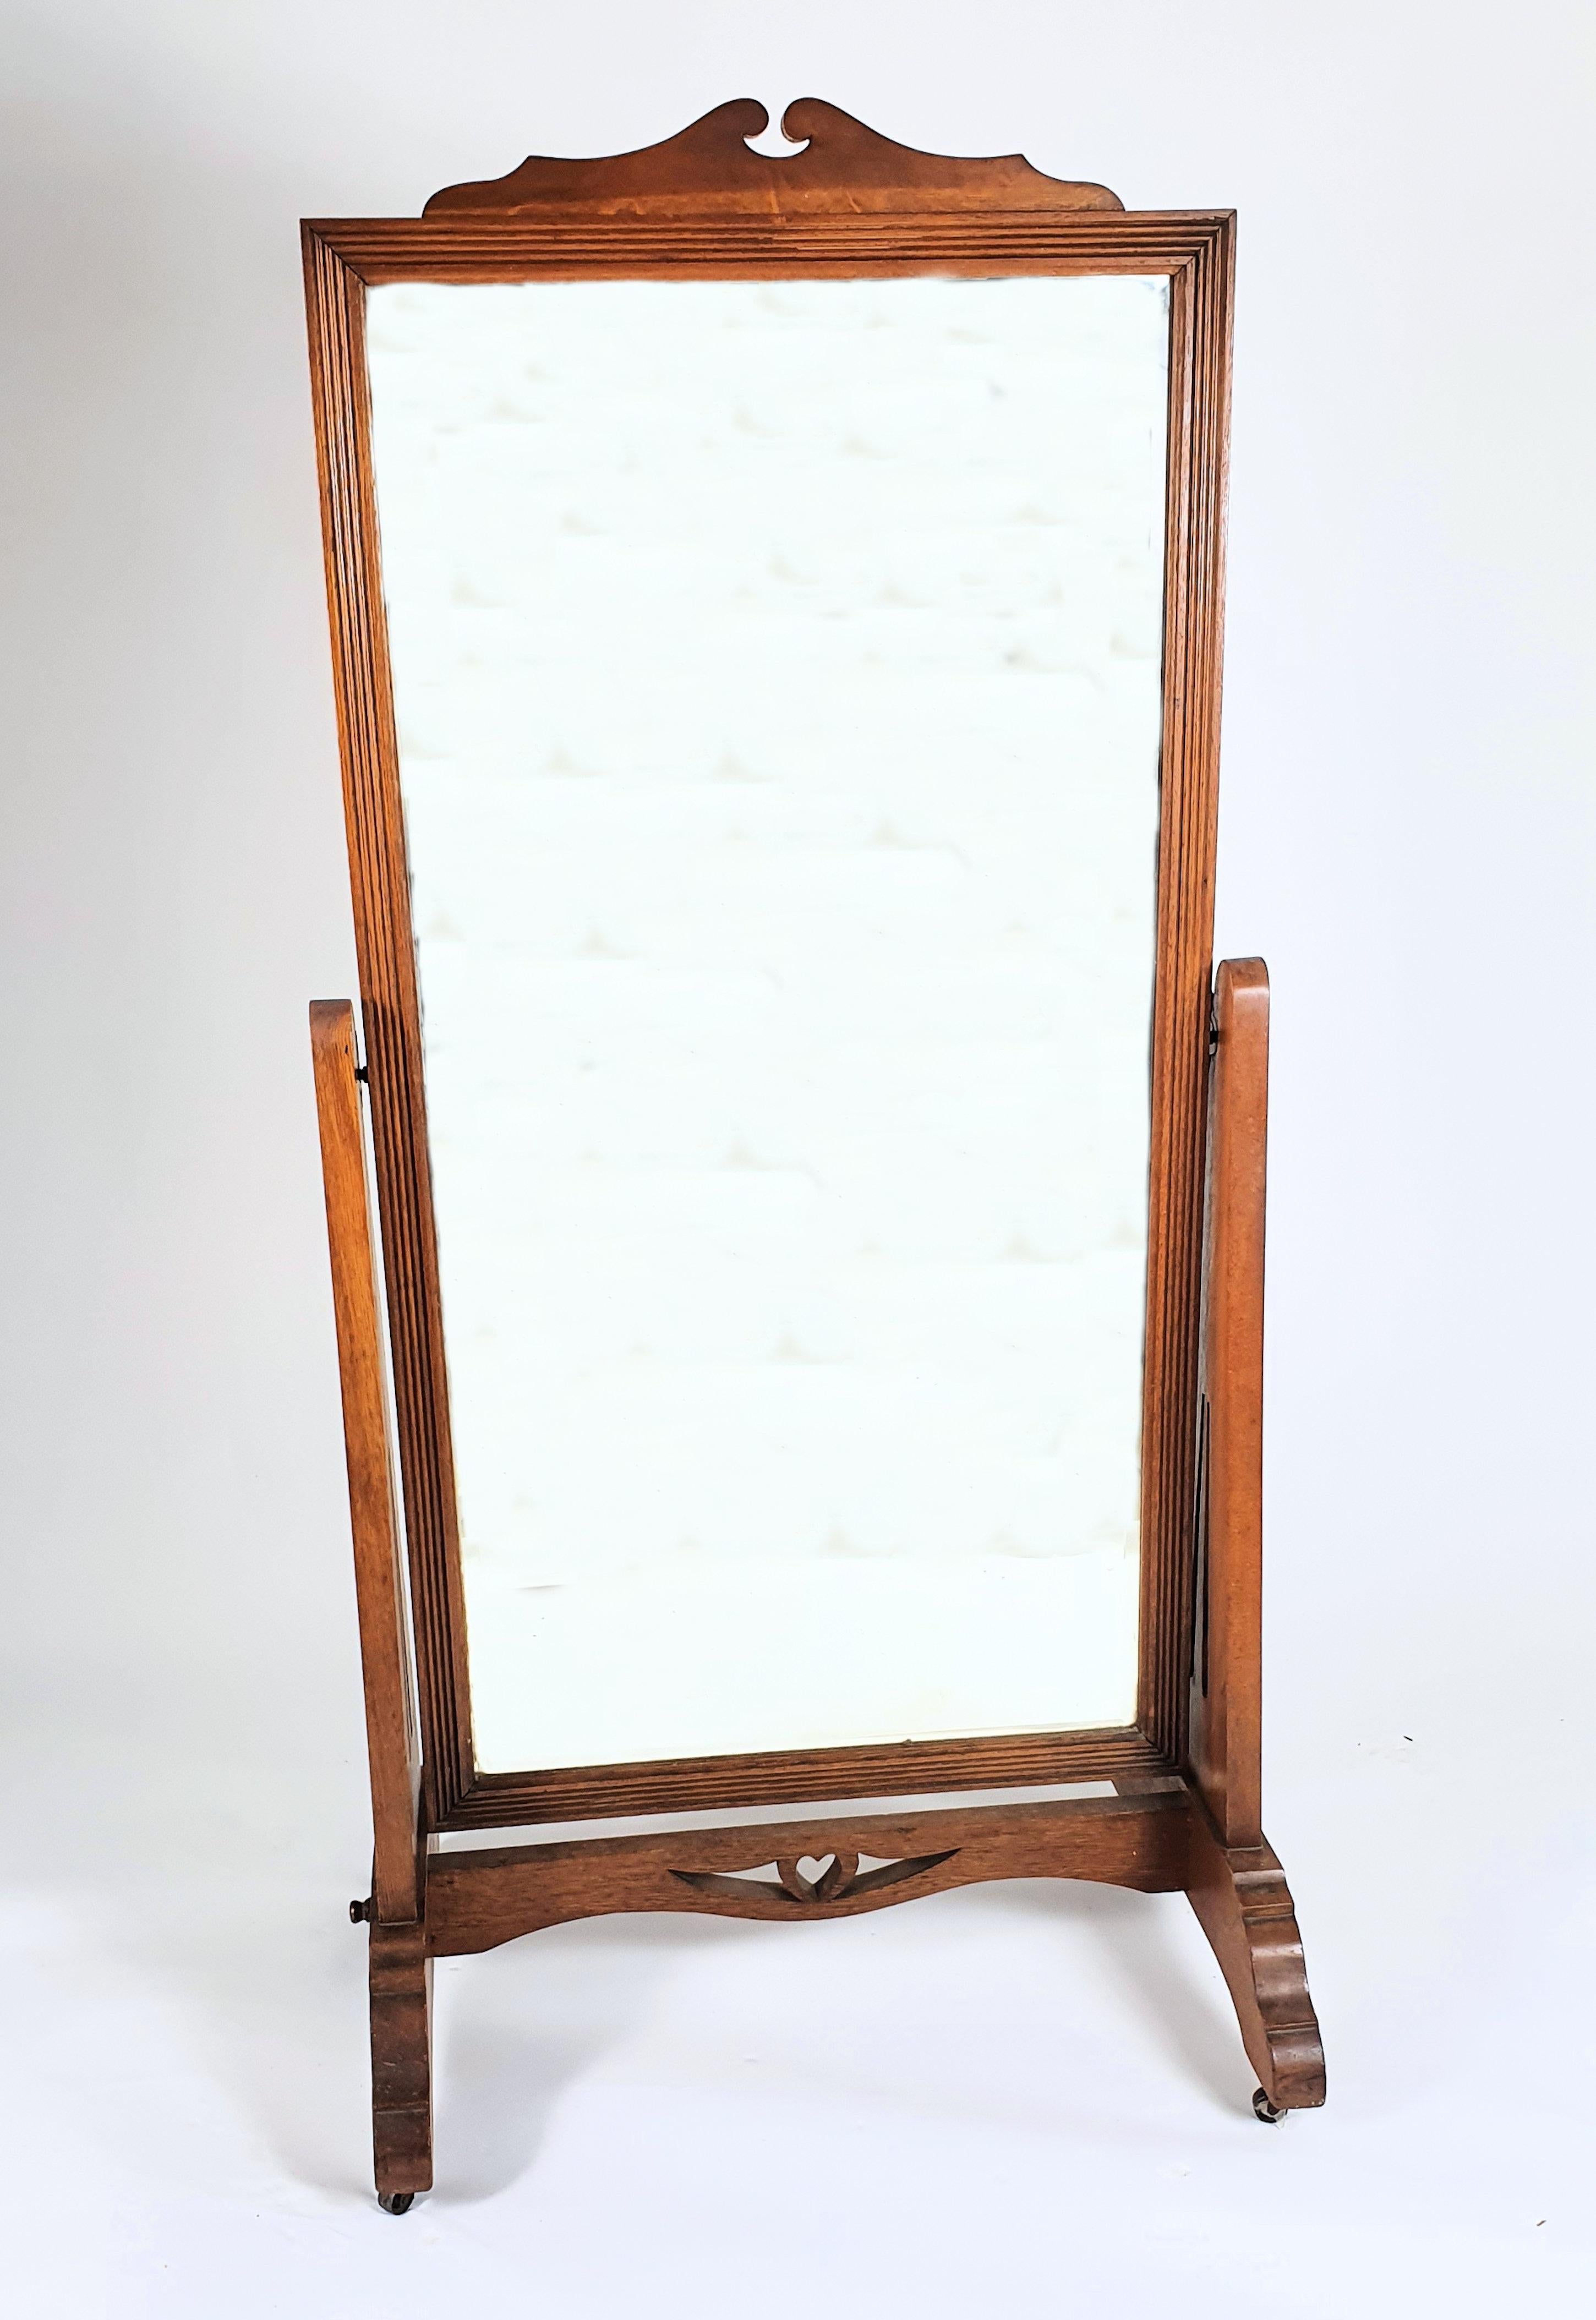 This very attractive and charming Arts & Crafts oak chevalier mirror features a pierced heart shaped decoration on the base support and is supported on castors. It measures 31 in – 78.6 cm wide, 22 in – 56 cm deep and 62 ½ in – 158.8 cm in height.